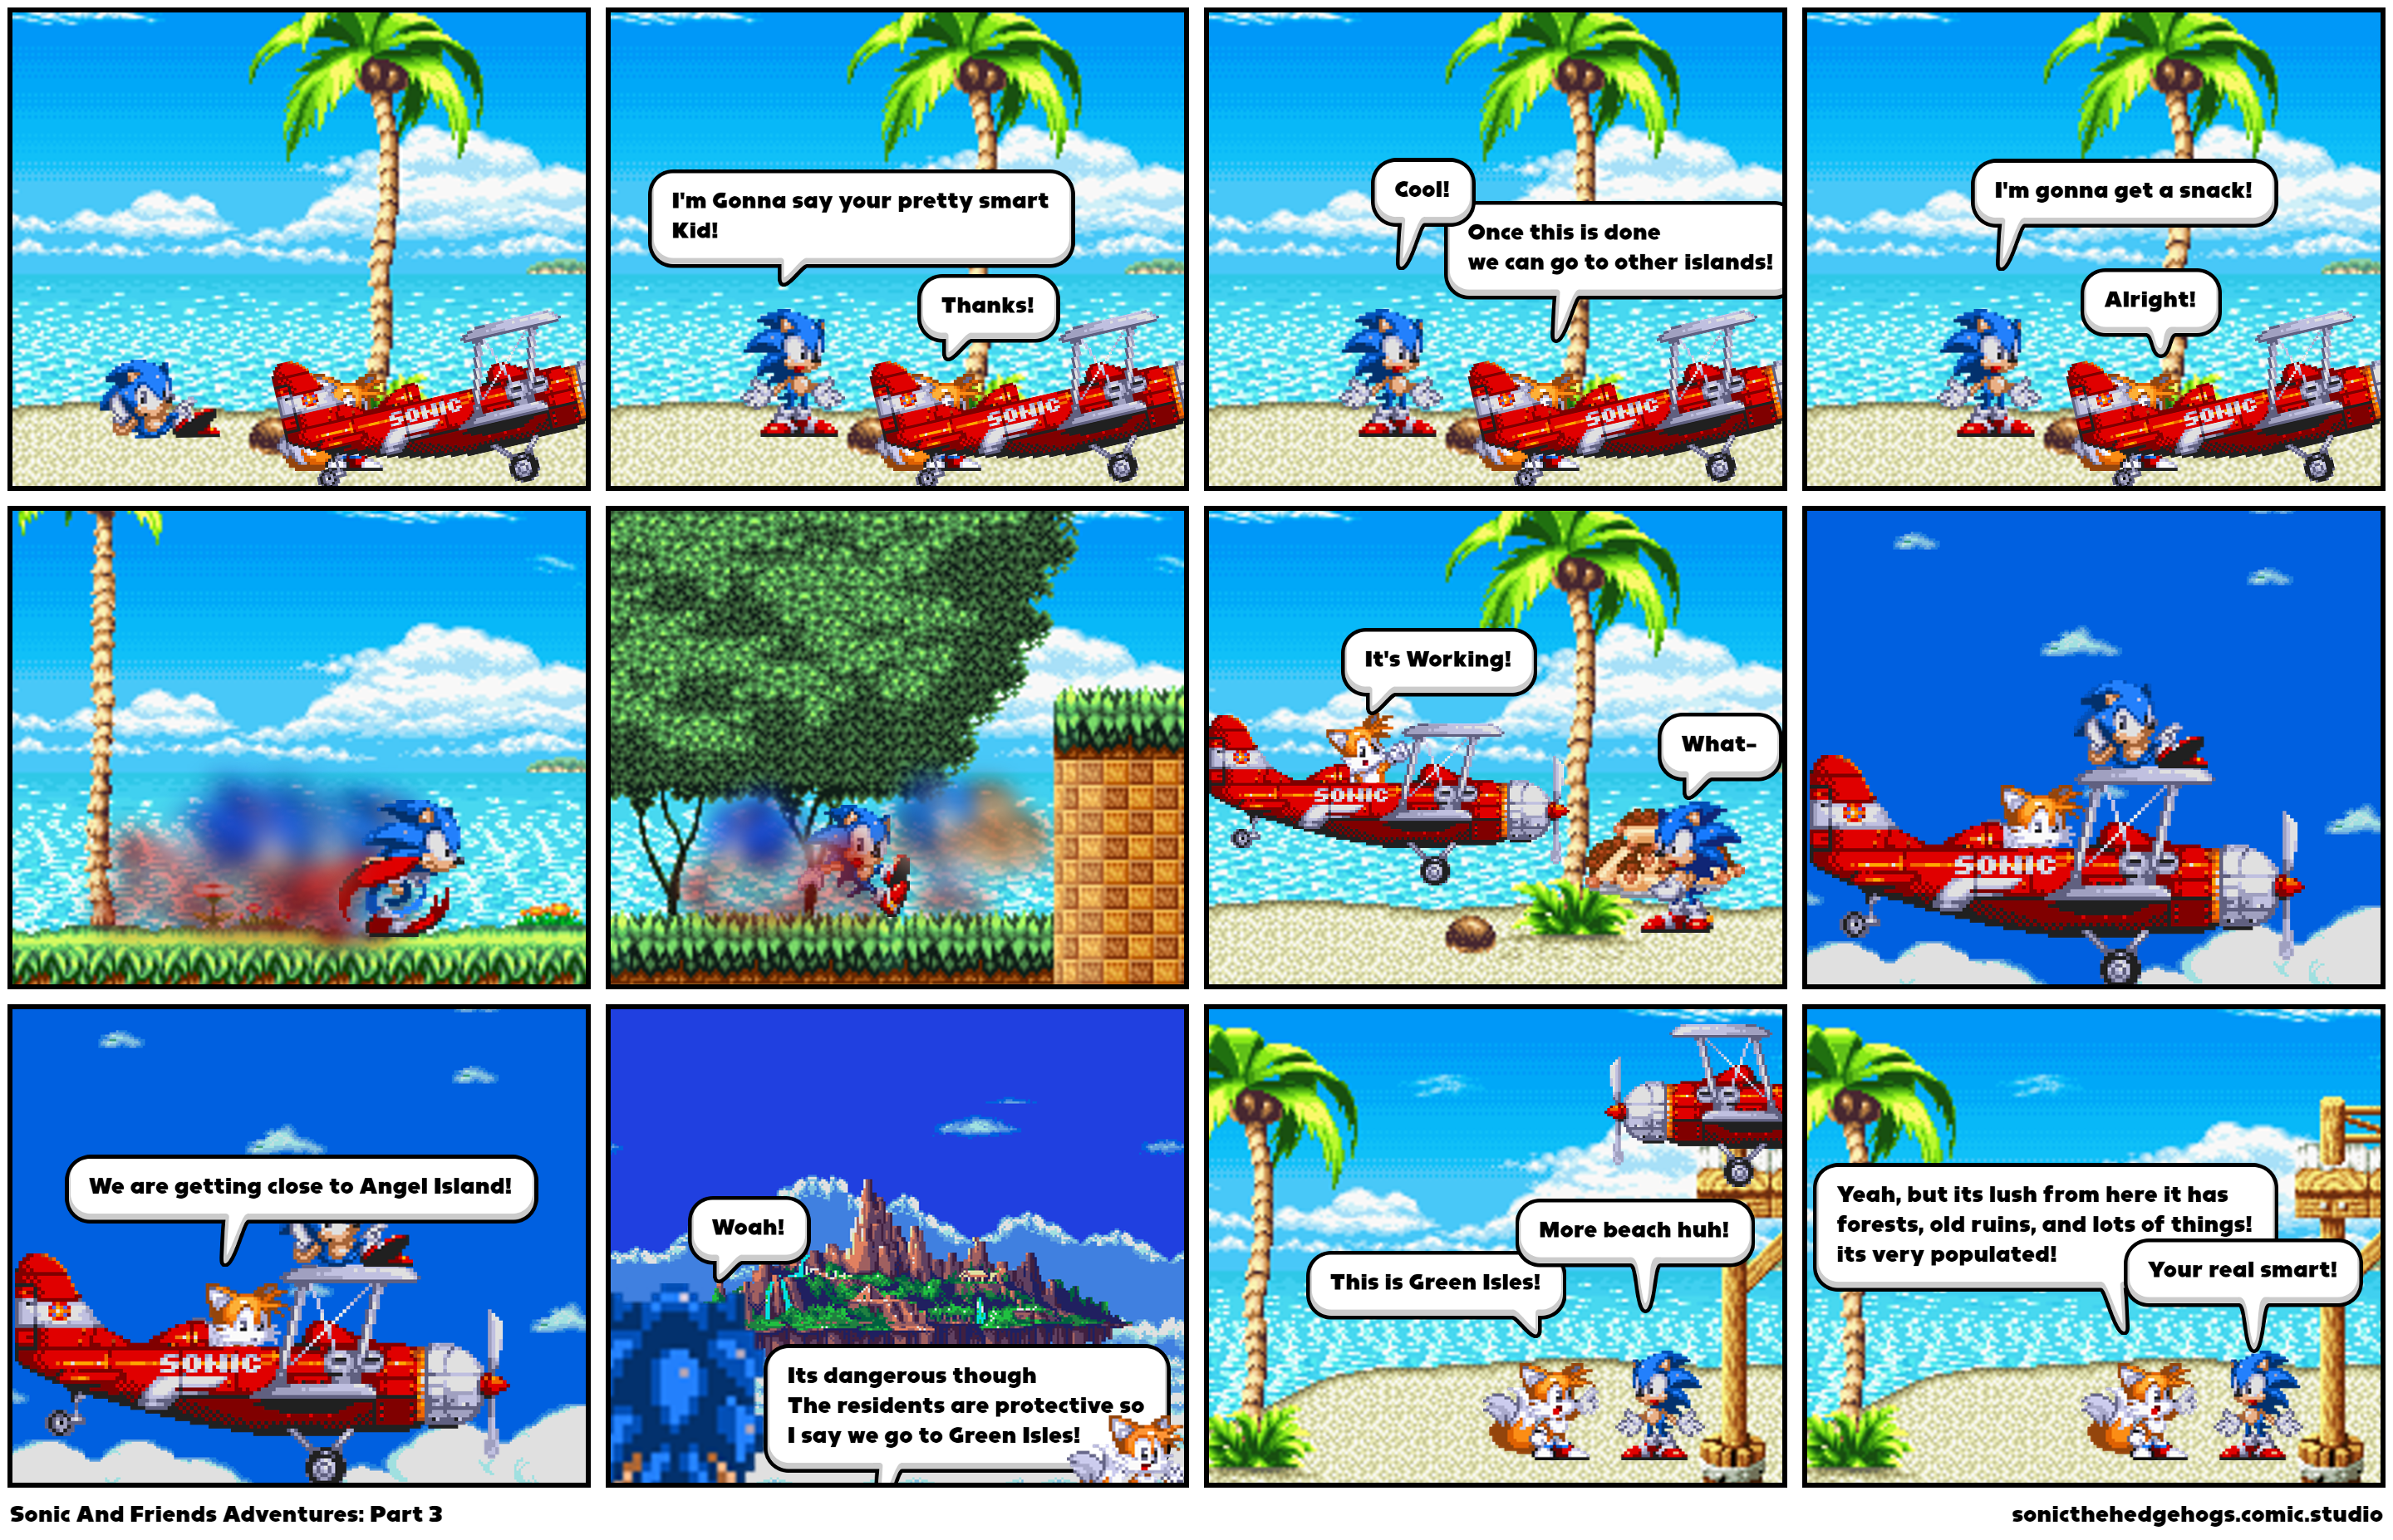 Sonic And Friends Adventures: Part 3